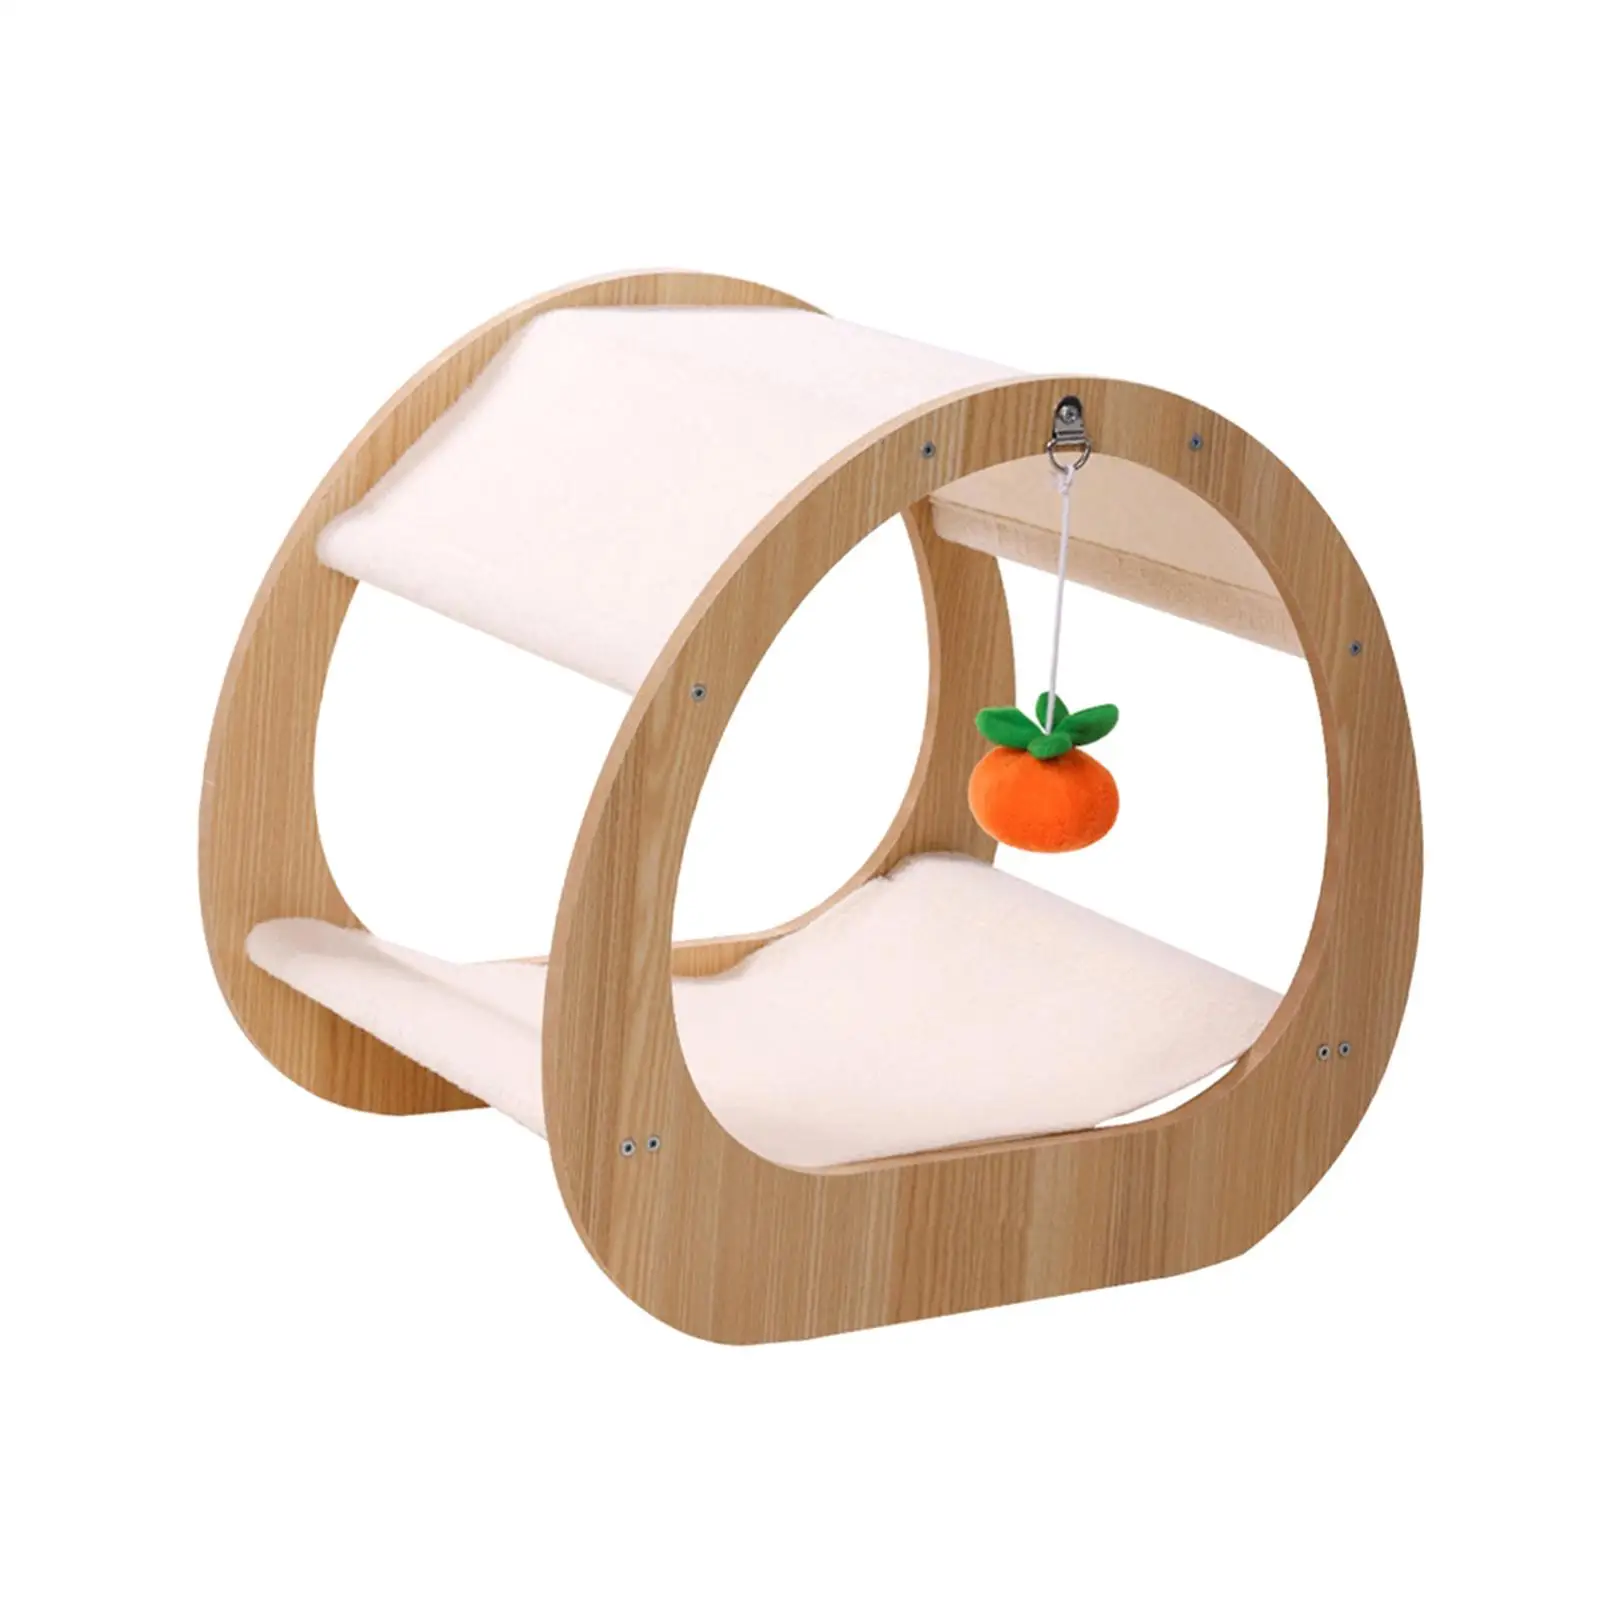 Cat Scratch Post Playing Platform Resting Cat Furniture Multifunction Cat House for Indoor Cats Kitten Rabbit Large Cats